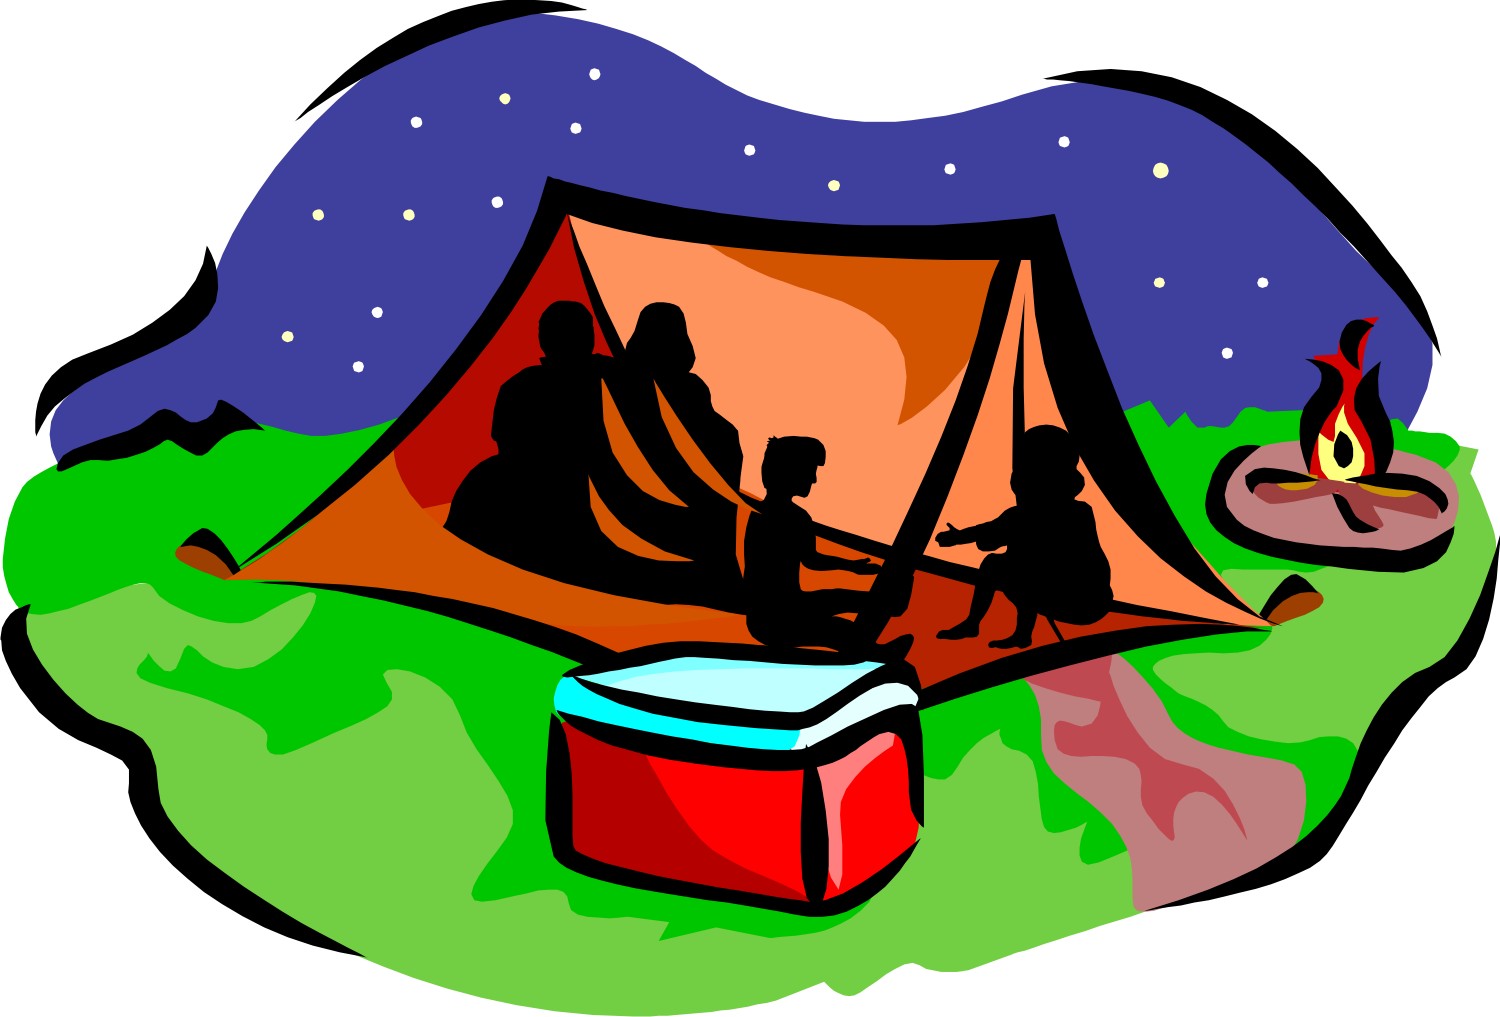 Girls Camp Clipart   Cliparts Co